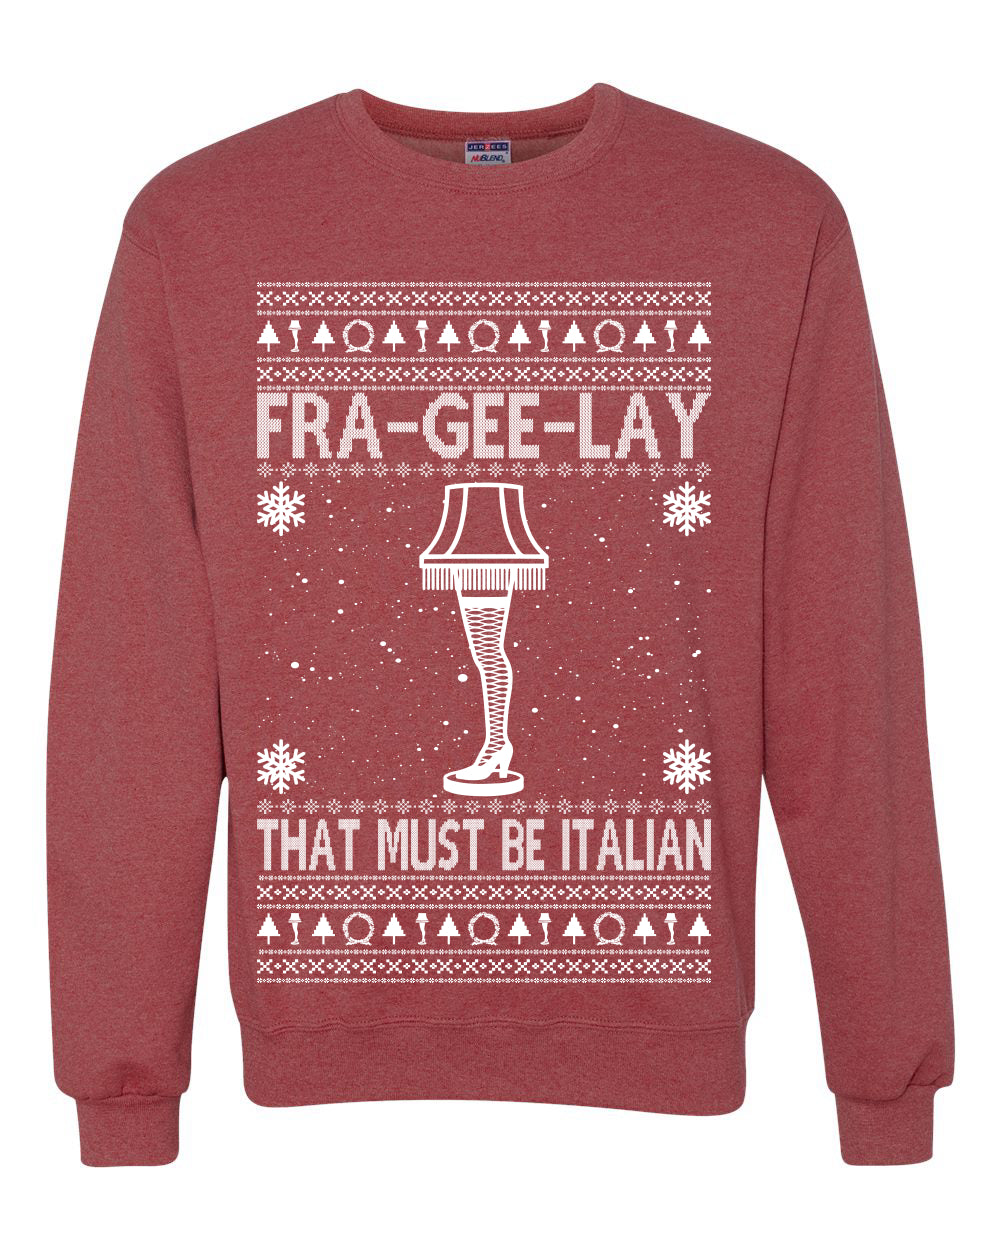 Fra-gee-lay Funny Movie Qoutes That Must Be Italian Ugly Christmas Sweater Unisex Crewneck Graphic Sweatshirt